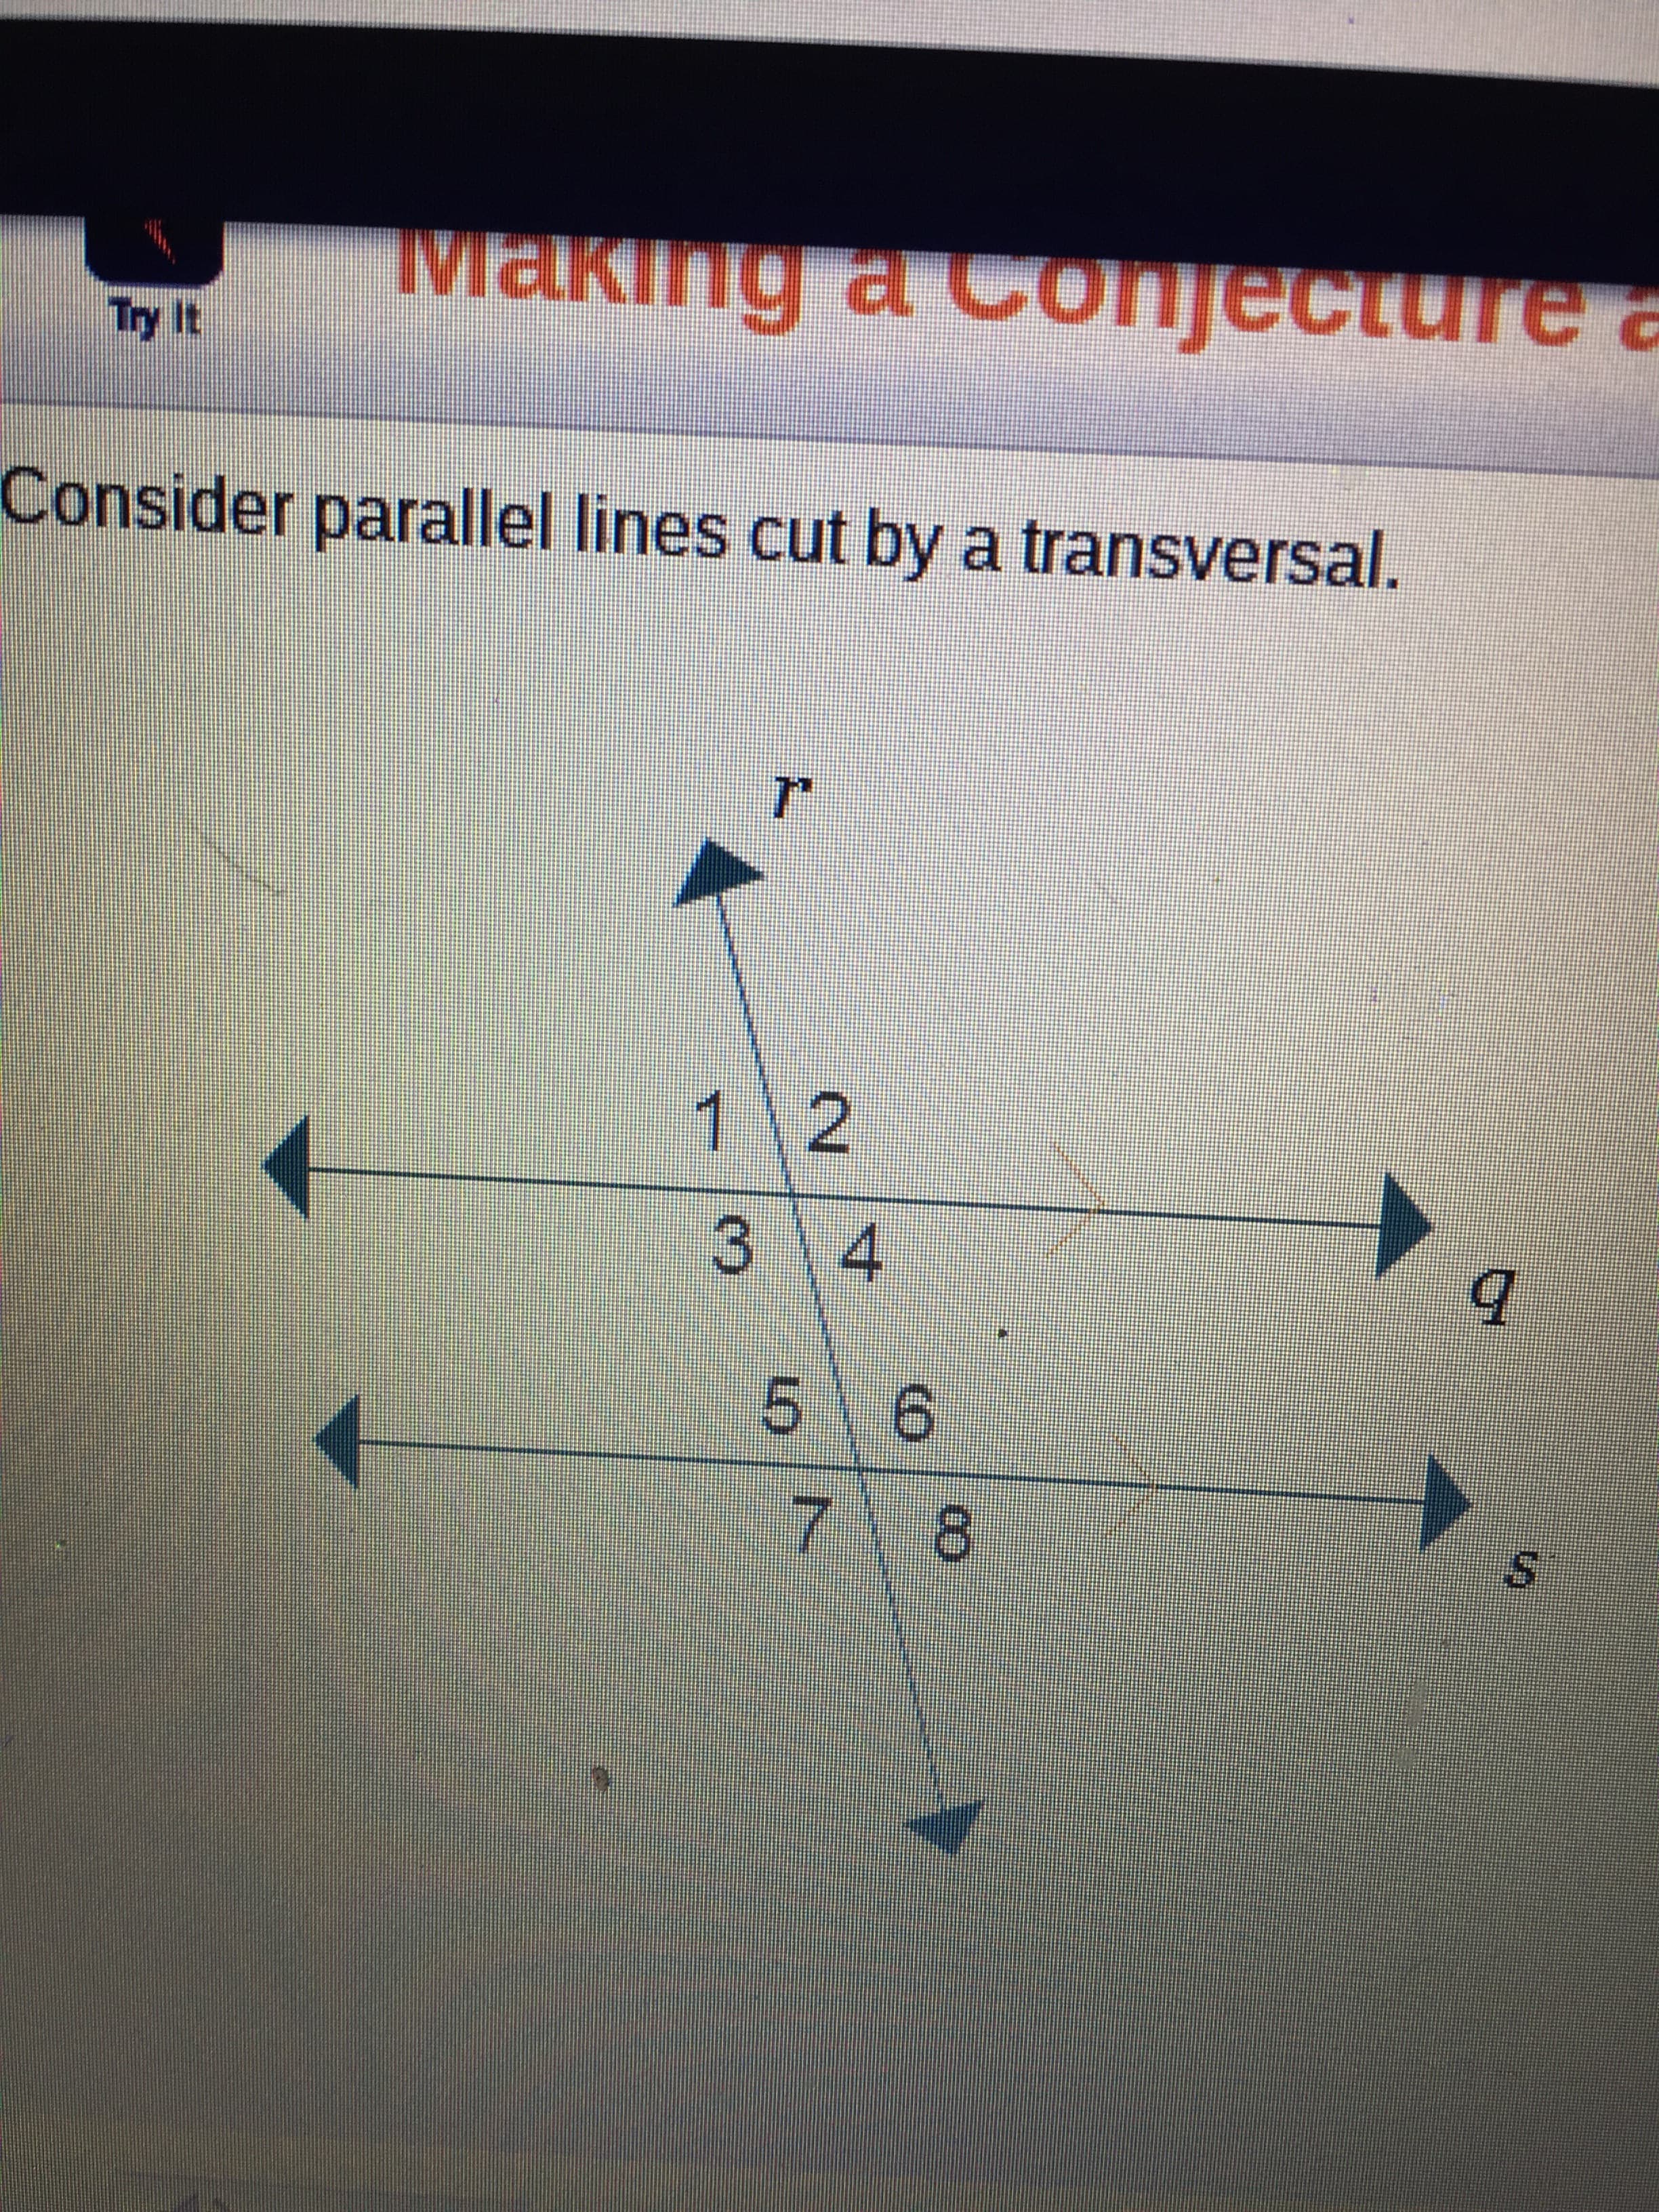 Making a Conjecture a
Consider parallel lines cut by a transversal.
1 2
3\4
7 8
S.
